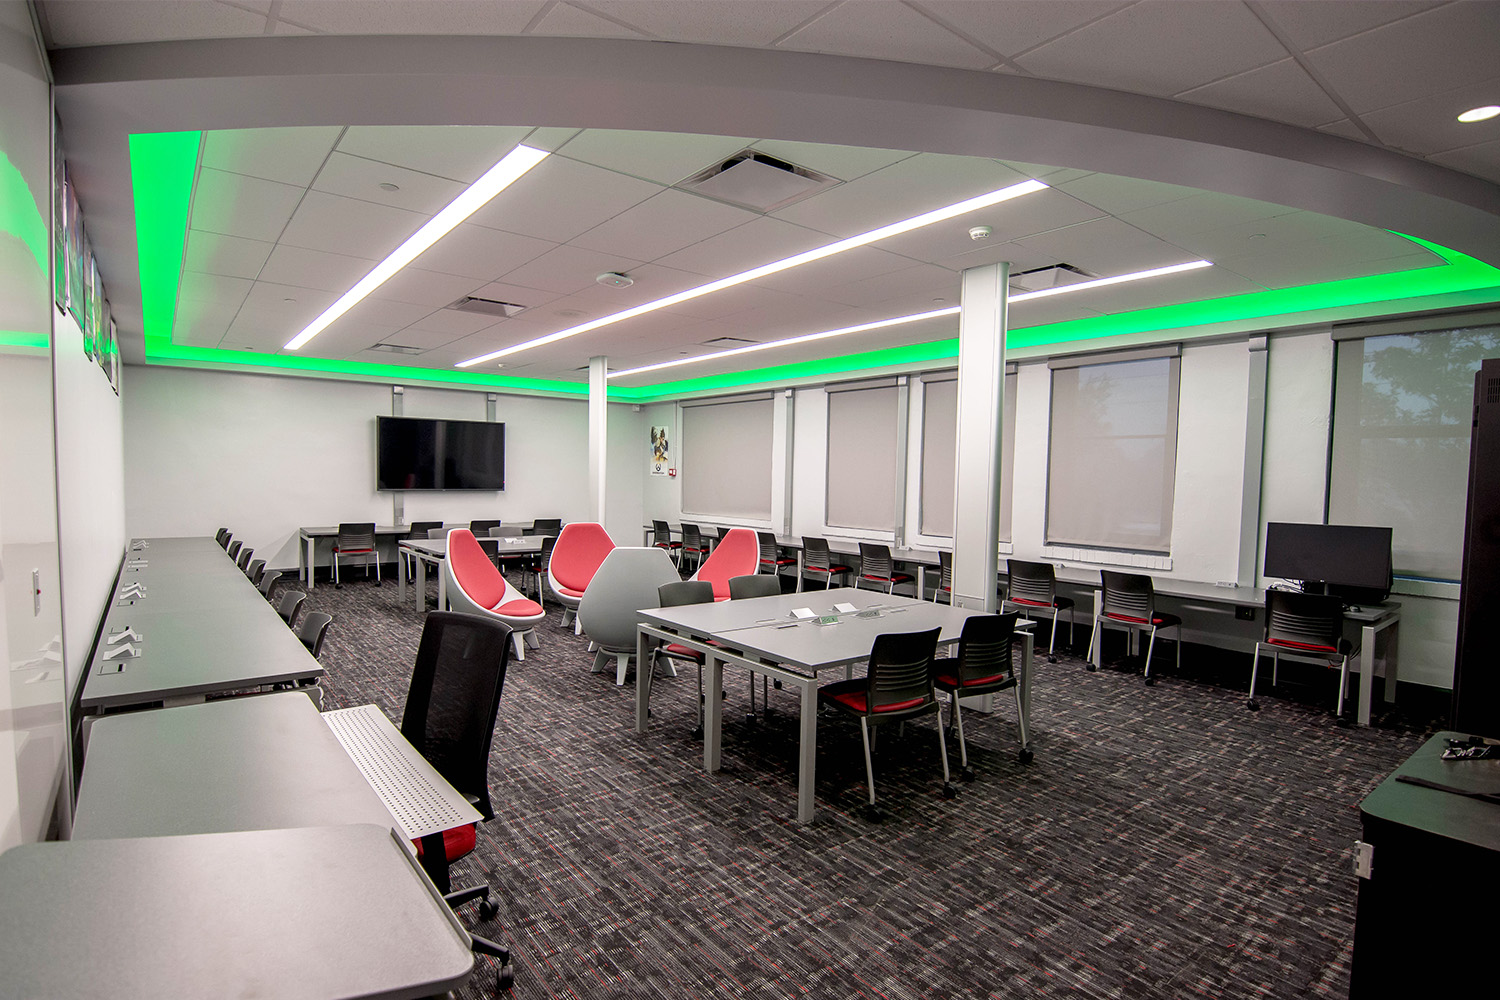 Andrew Jackson High game design lab with green LED lights in the ceiling, wall mounted media displays and desks